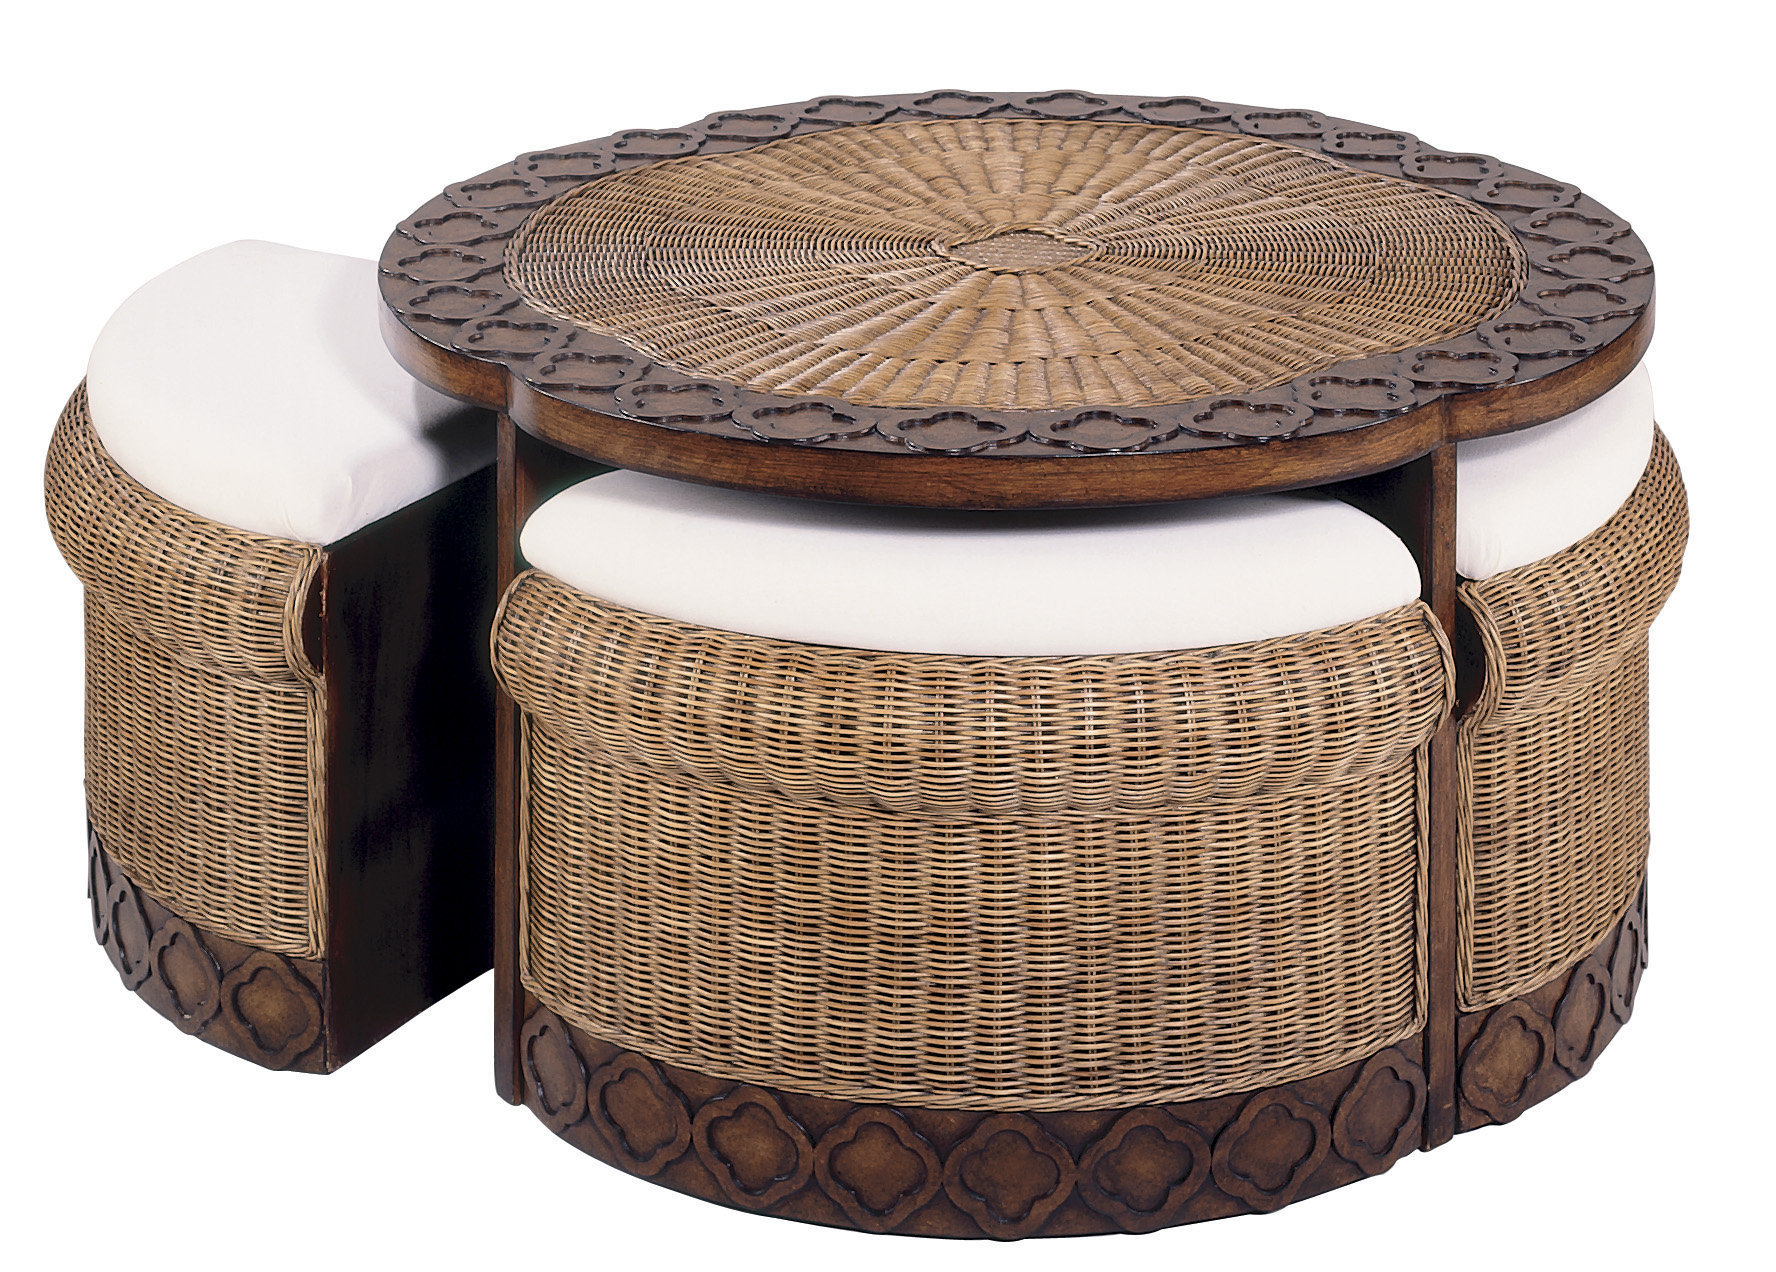 33+ Round Coffee Table Ottomans Underneath Pictures - Inspiration Coffe